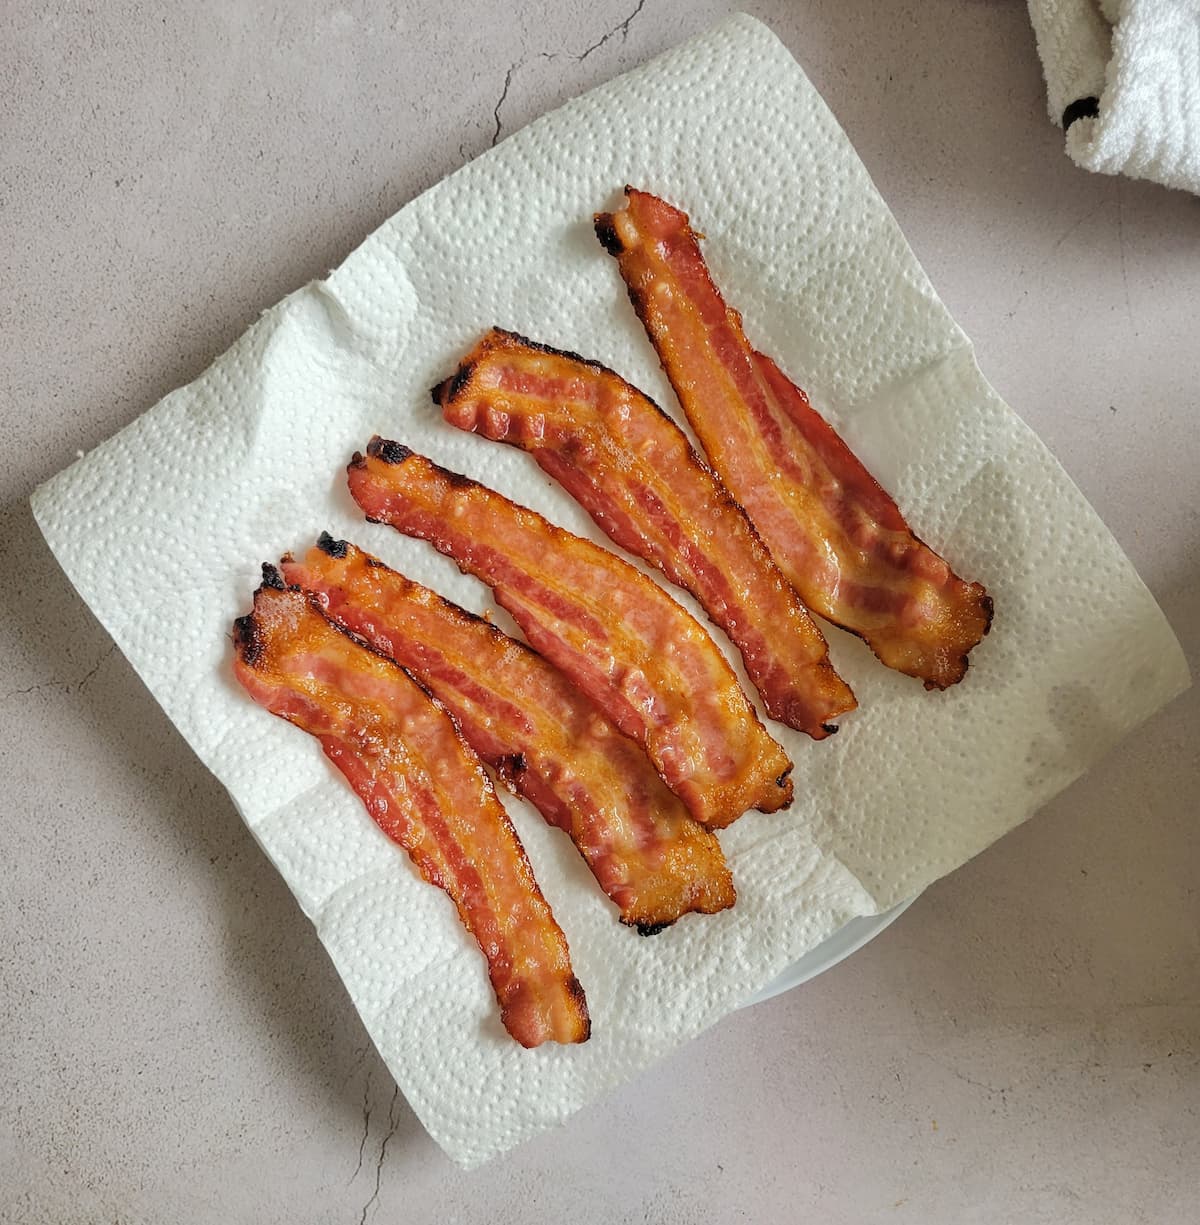 5 cooked strips of bacon on a paper towel lined plate